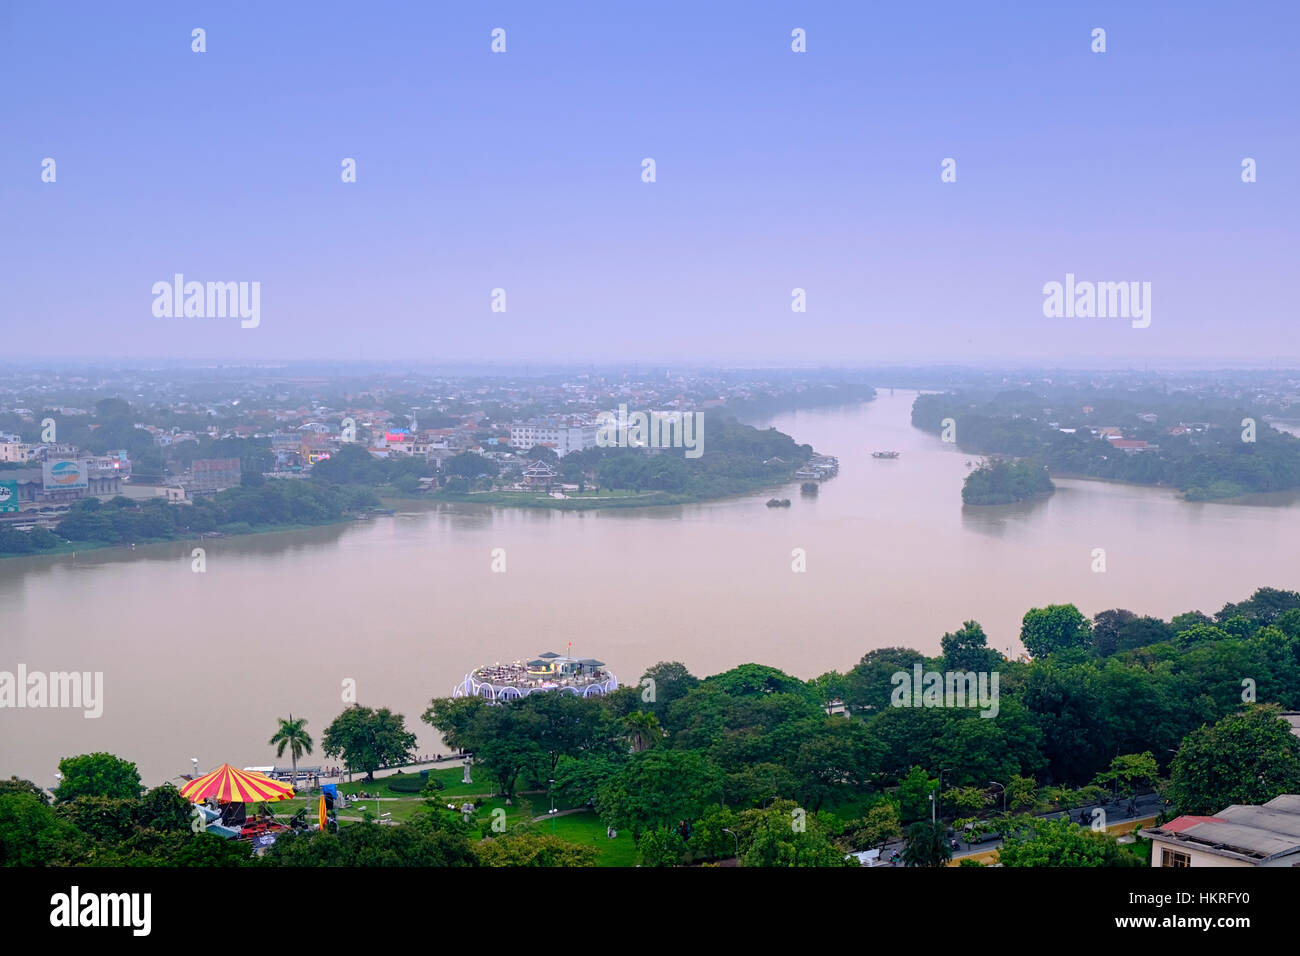 View of the city of Hue and the Perfume River in Vietnam Stock Photo